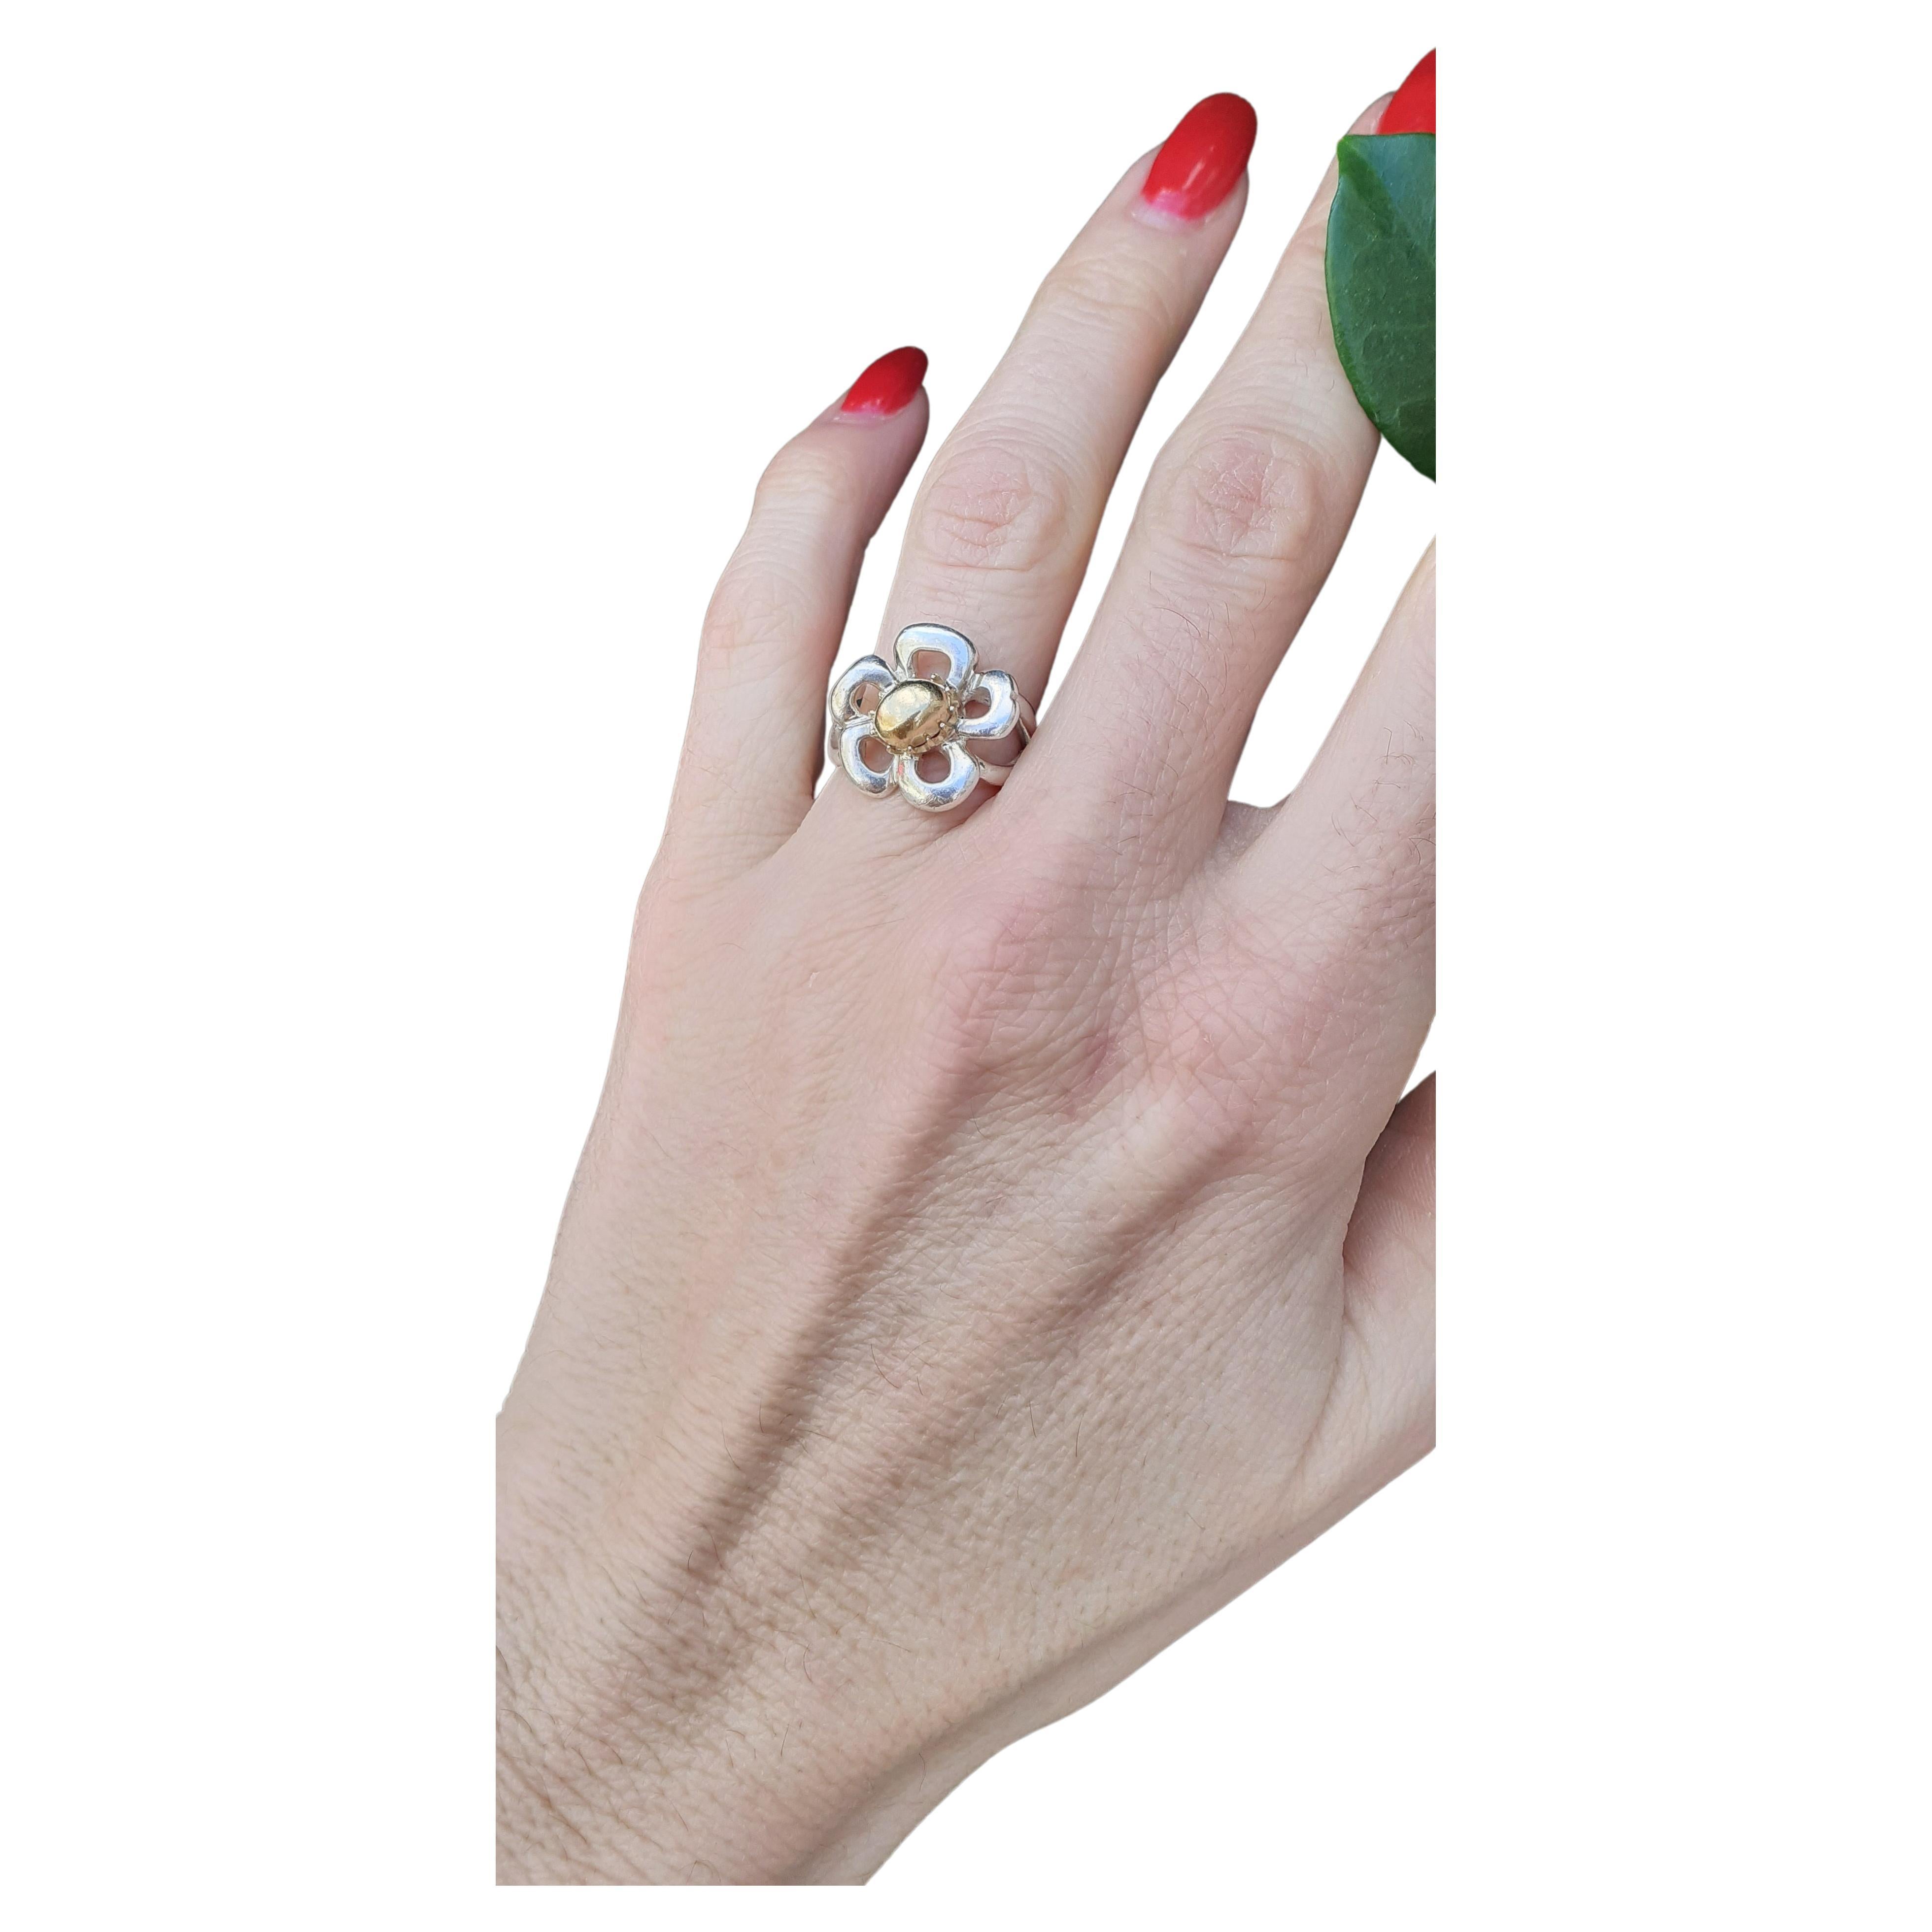 Hermès Flower Shaped Ring Silver and Gold Size 7 / 53 Resizable For Sale